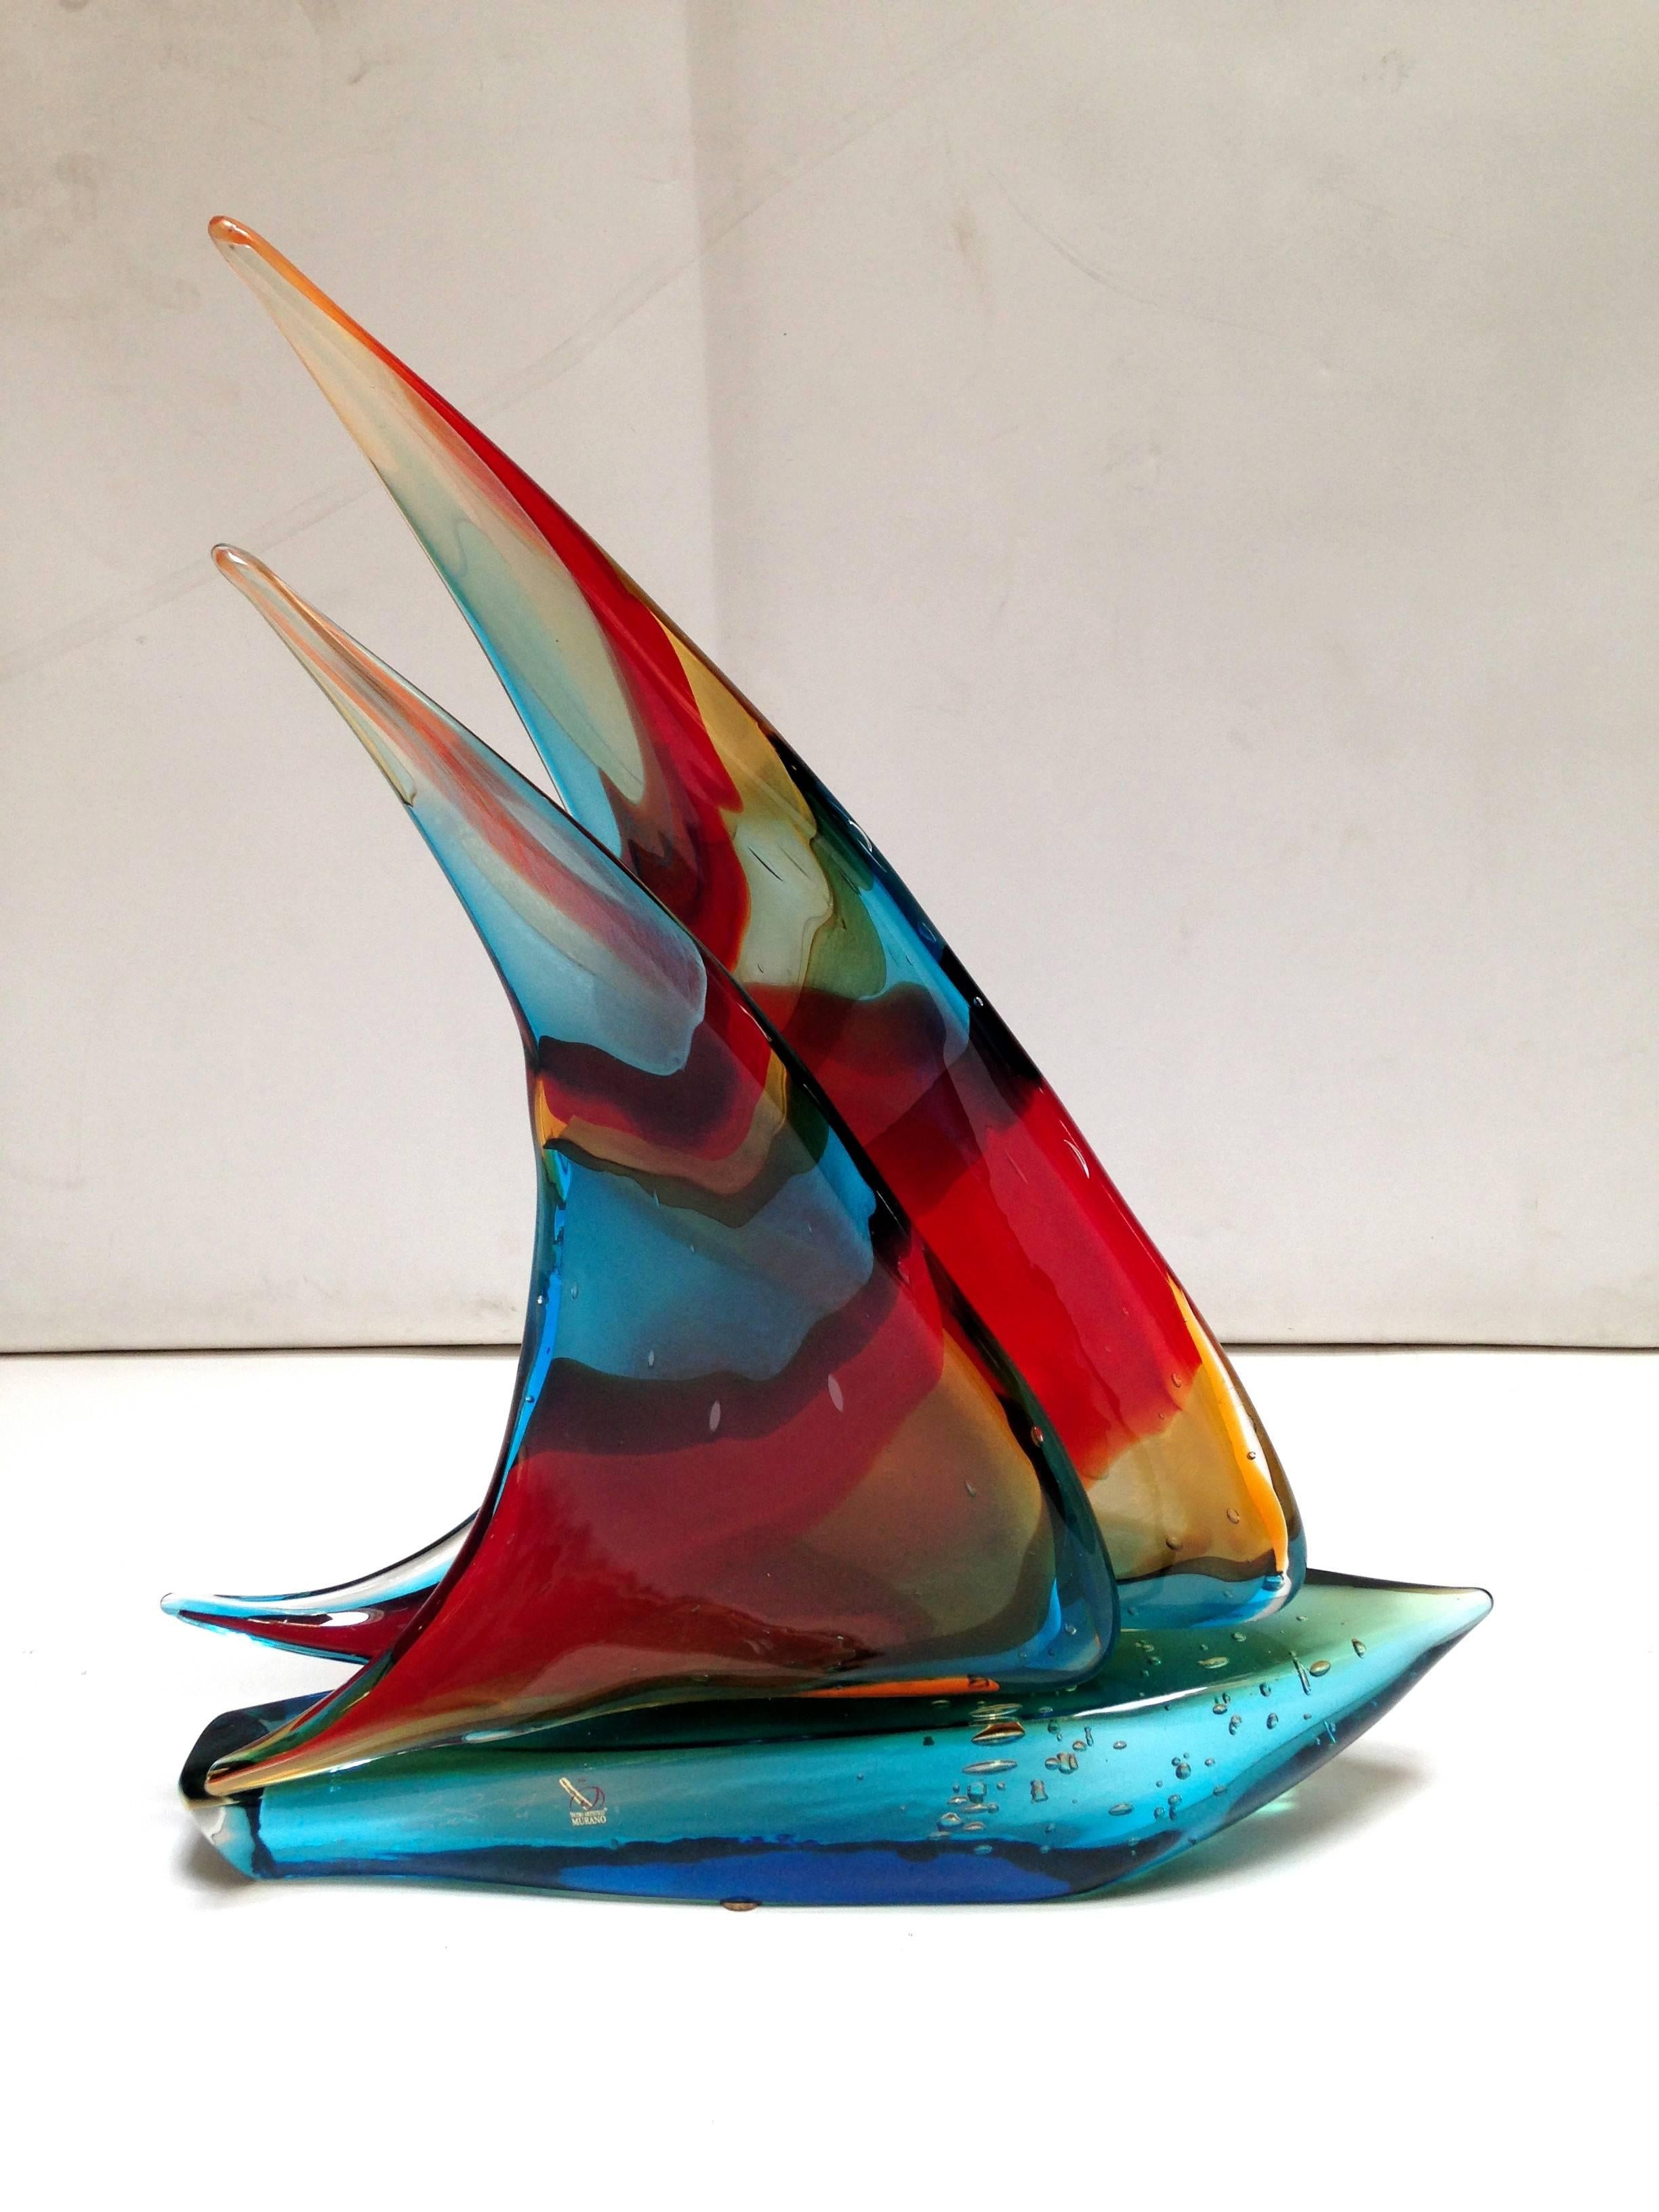 Original vintage Murano glass double sail sailboat by Sergio Costantini
Made in Italy in the 1960s
Signed on the base
